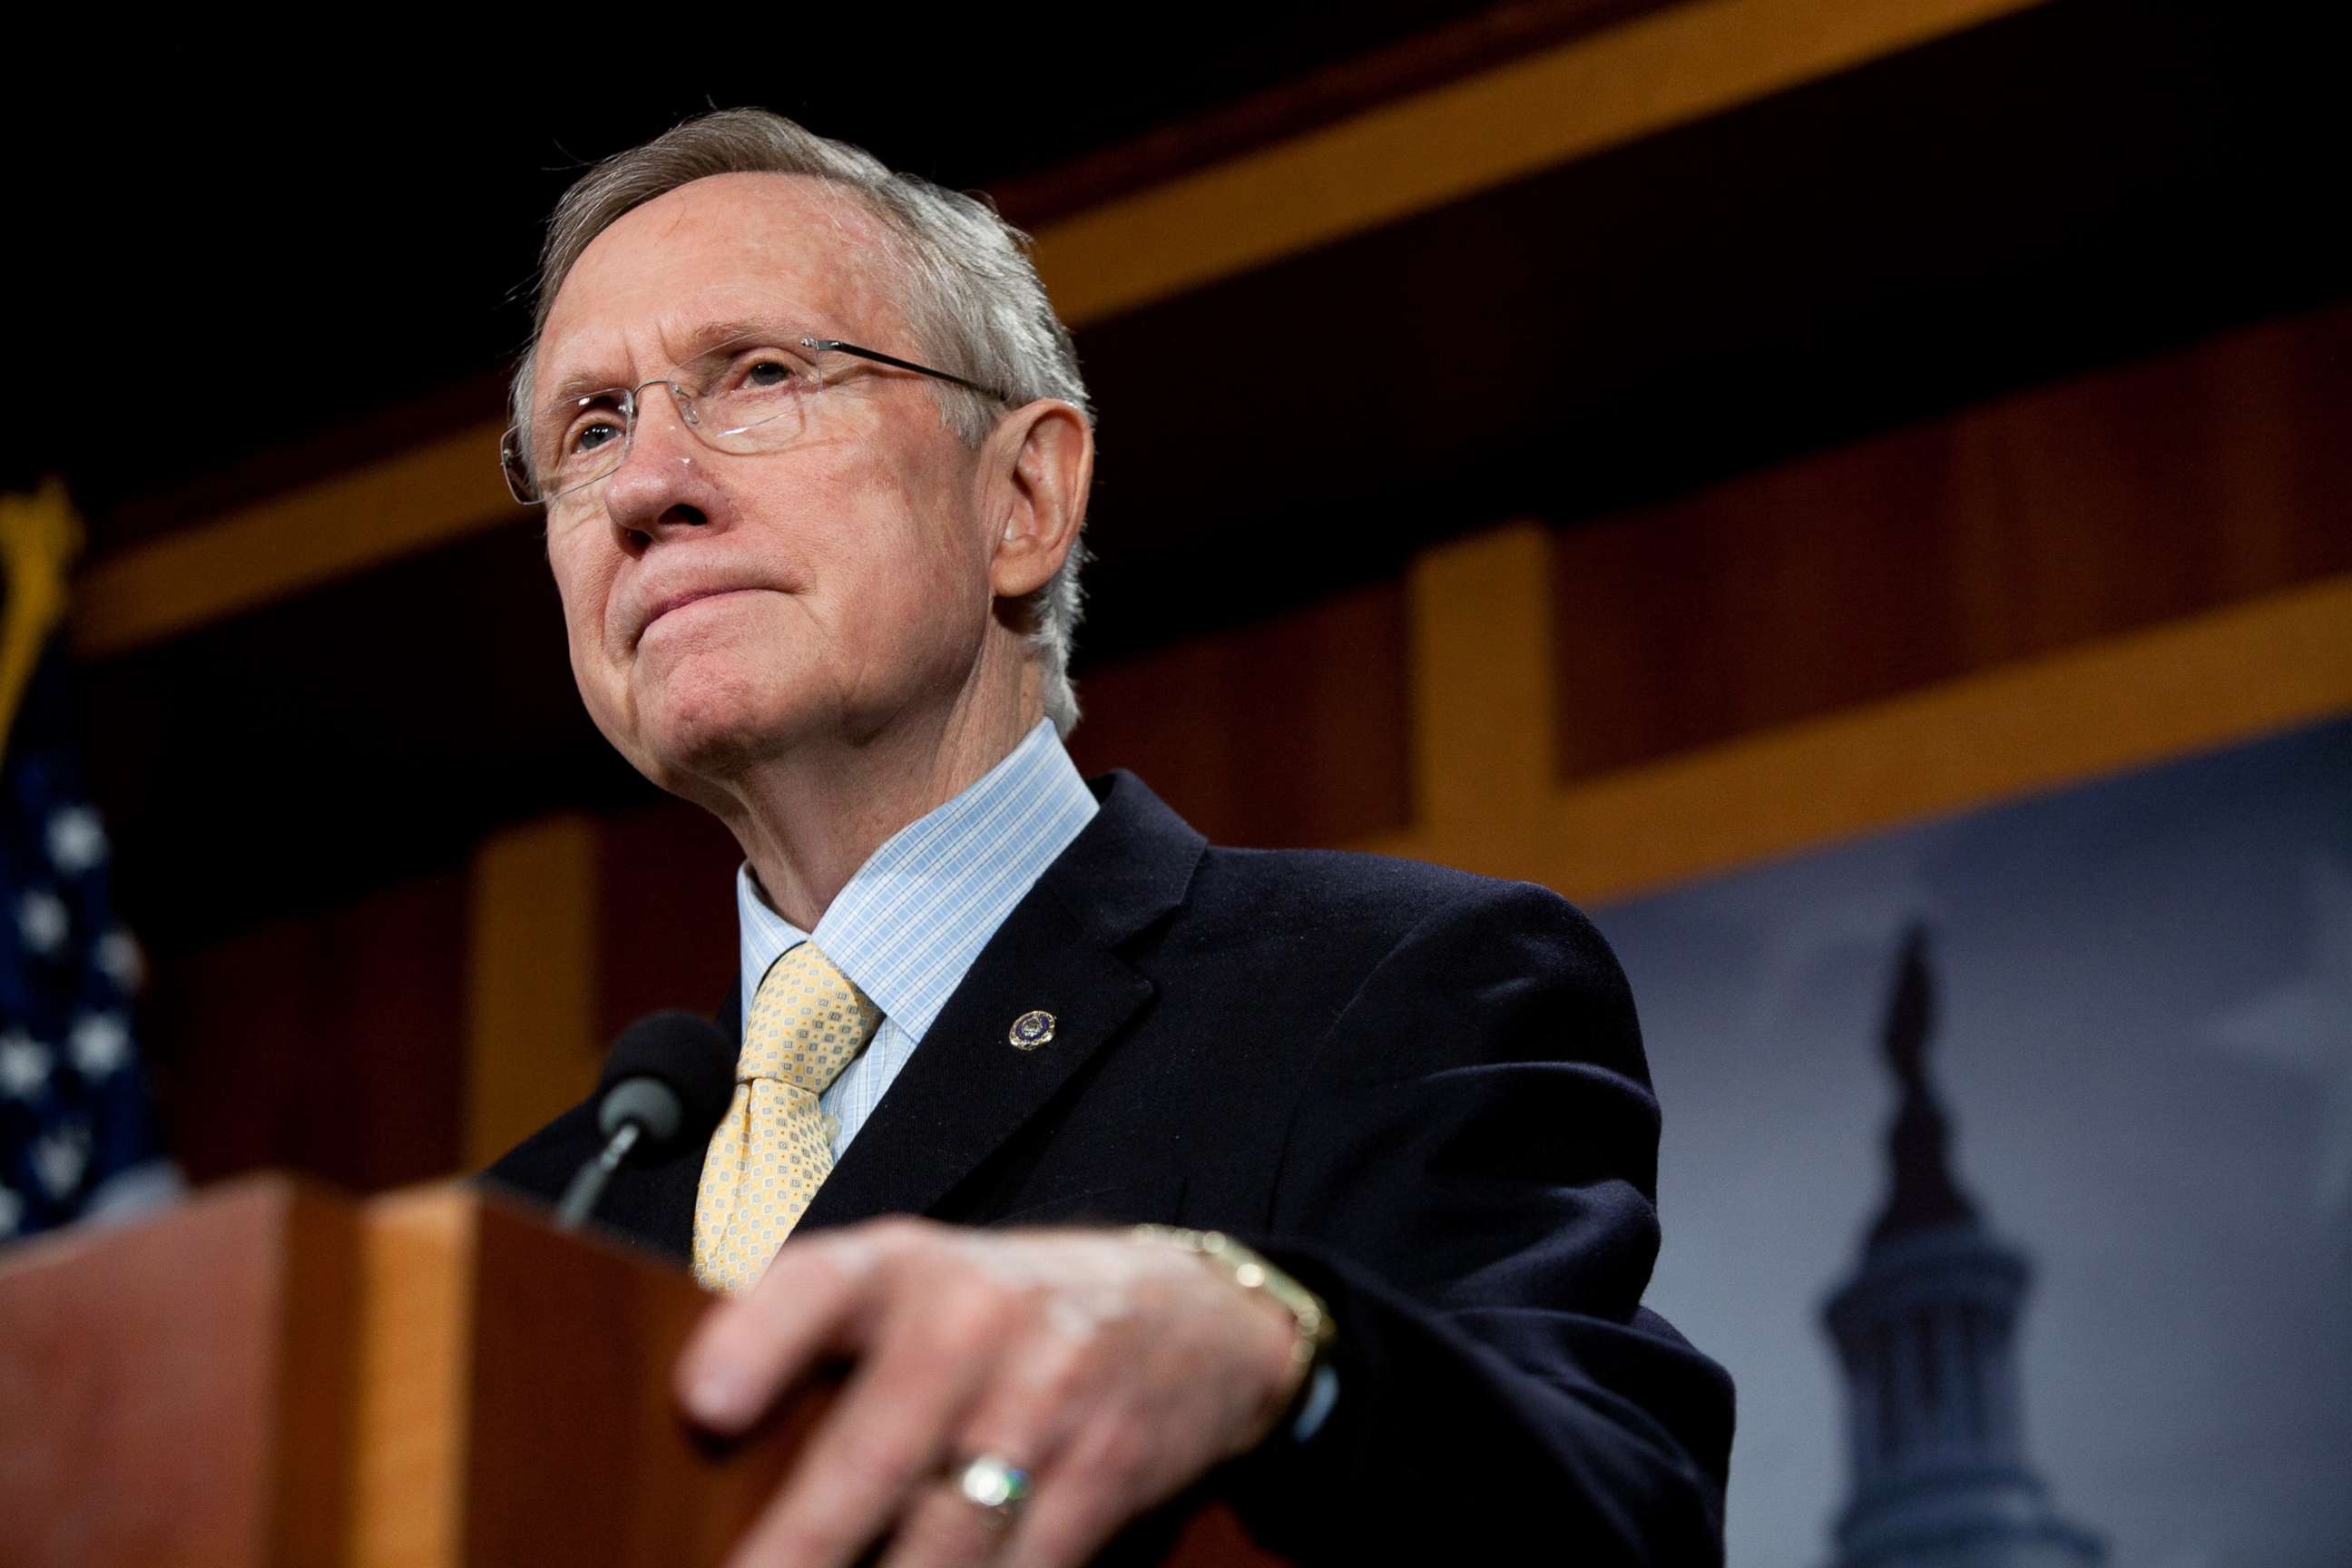 PHOTO: Senate Majority Leader Harry Reid speaks at a news conference with other senior Democratic Senators on efforts to reach an agreement on the federal budget on Capitol Hill, April 7, 2011, in Washington, DC.